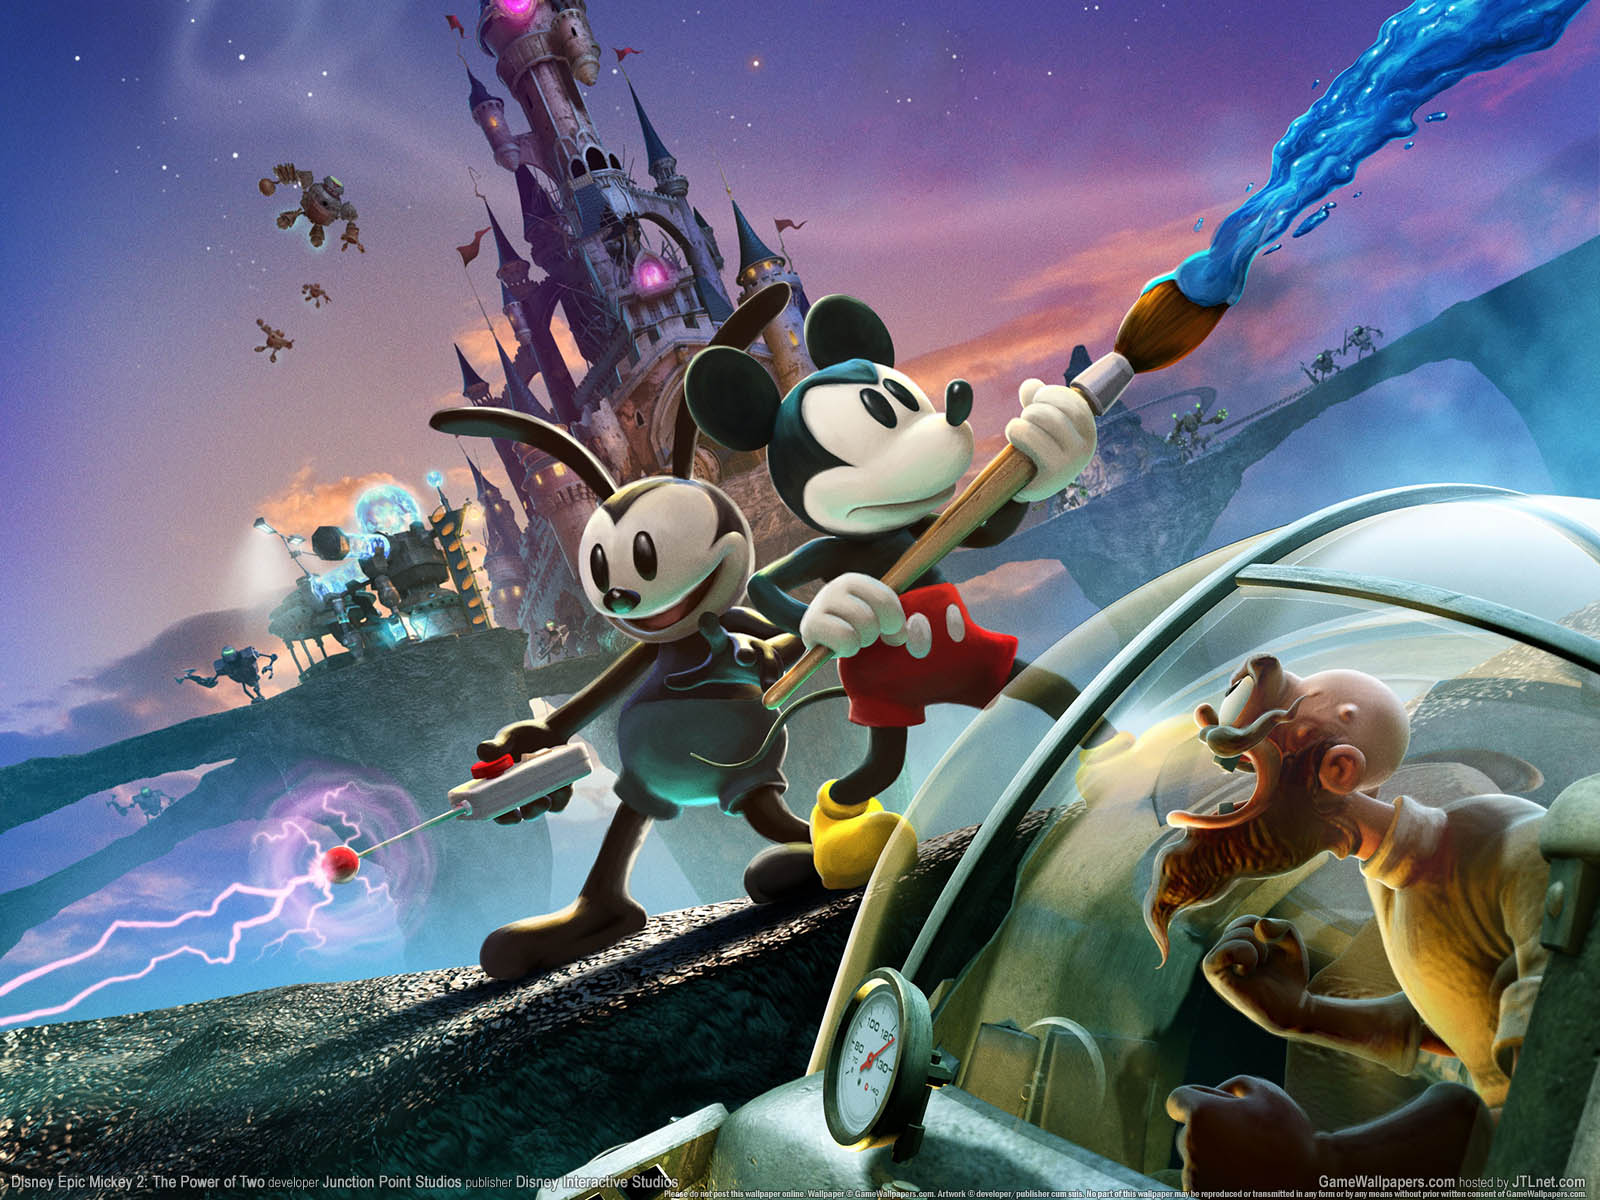 Disney Epic Mickey 2%2525253A The Power of Two fond d'cran 01 1600x1200